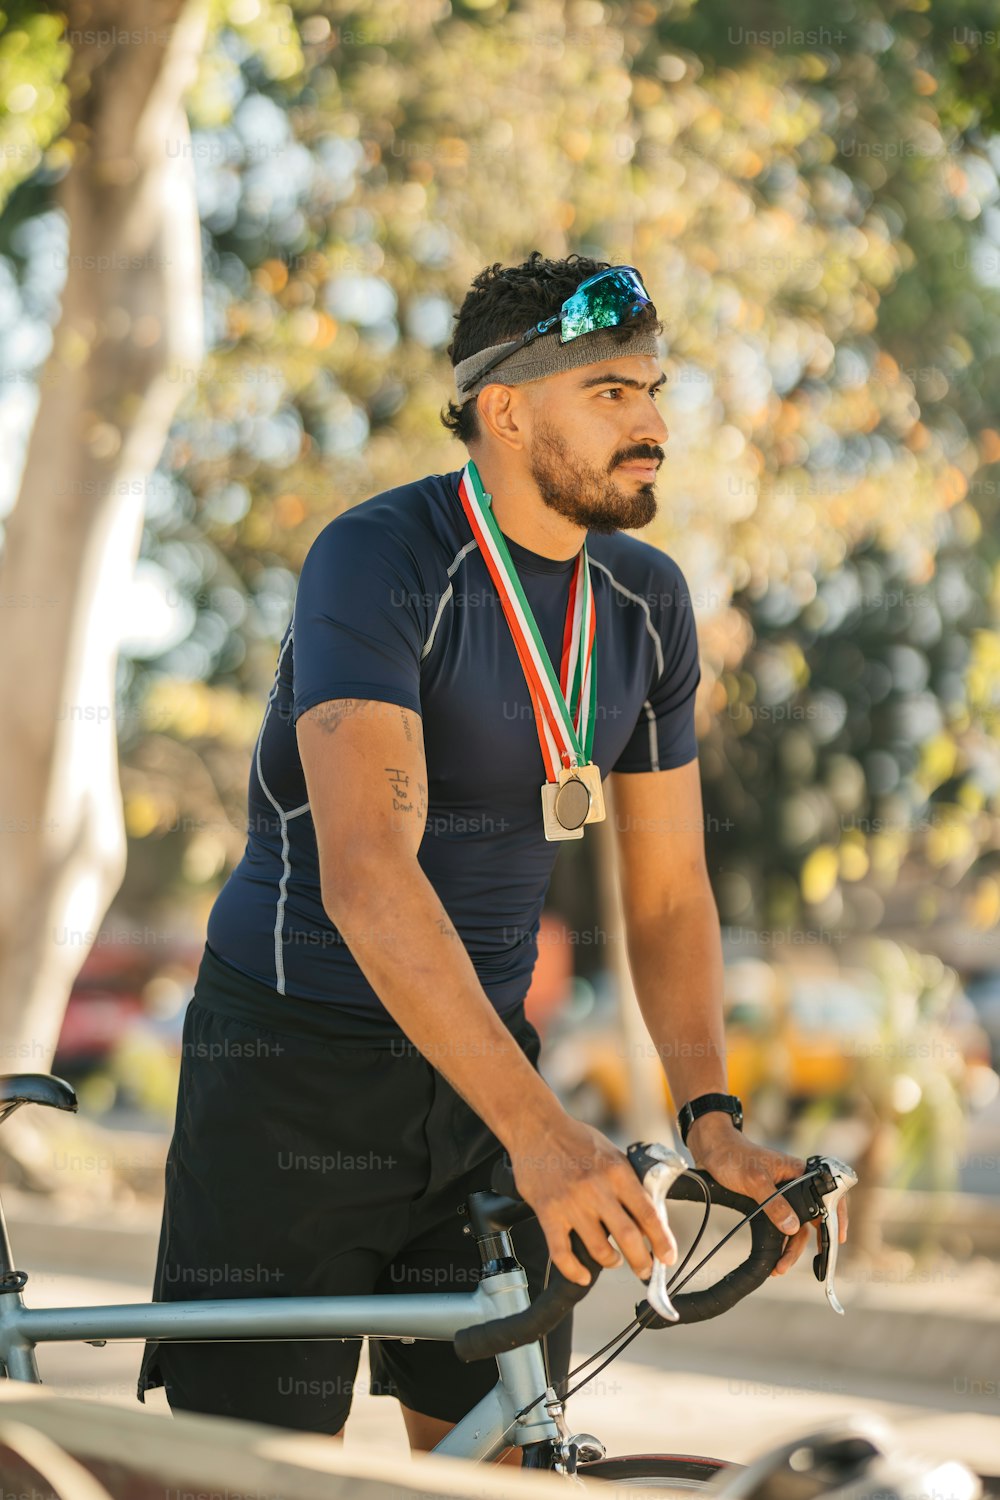 a man is riding a bike with a medal around his neck